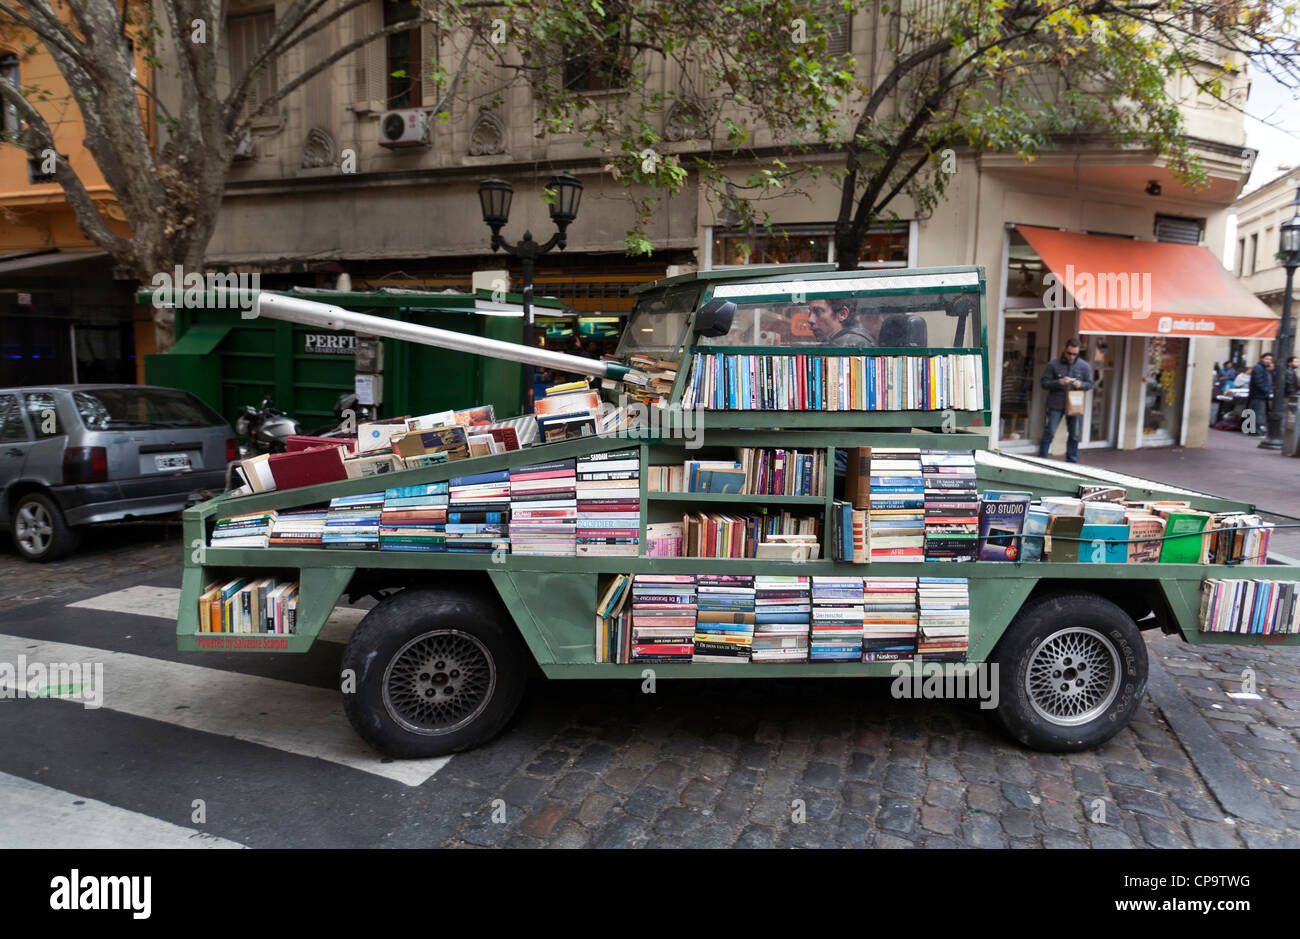 Artist Raul Lemesoff drives his vehicle called 'weapon of mass instruction', through the streets of Buenos Aires, Argentina Stock Photo